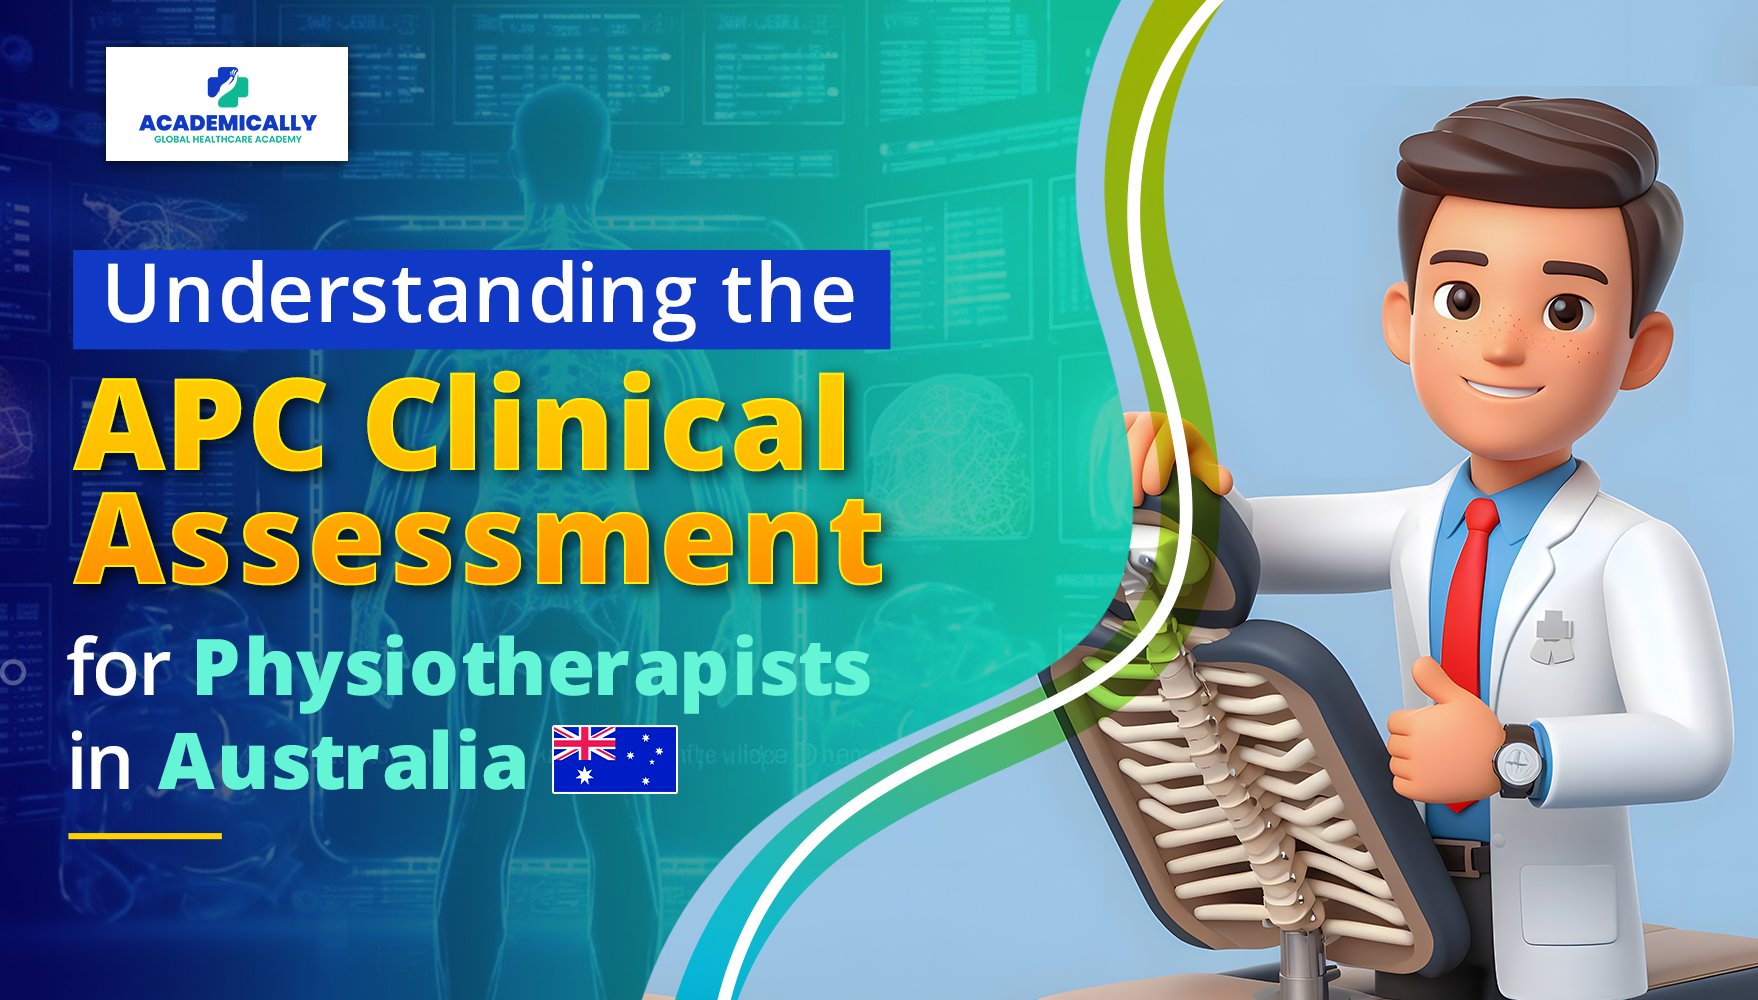 APC Clinical Assessment for Physiotherapists in Australia